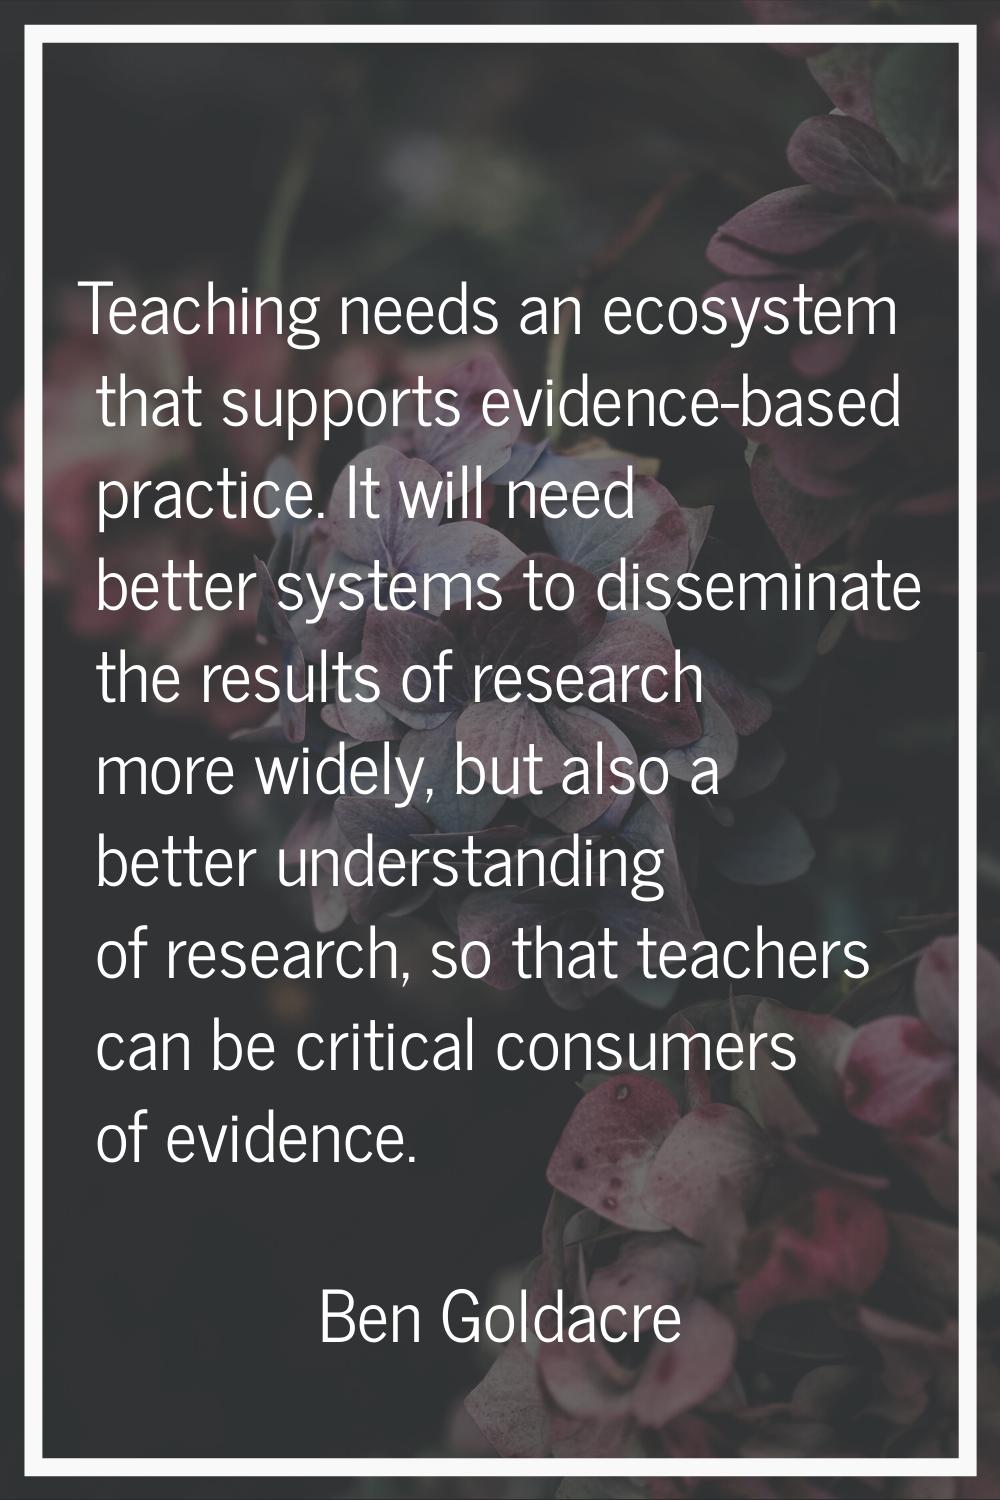 Teaching needs an ecosystem that supports evidence-based practice. It will need better systems to d